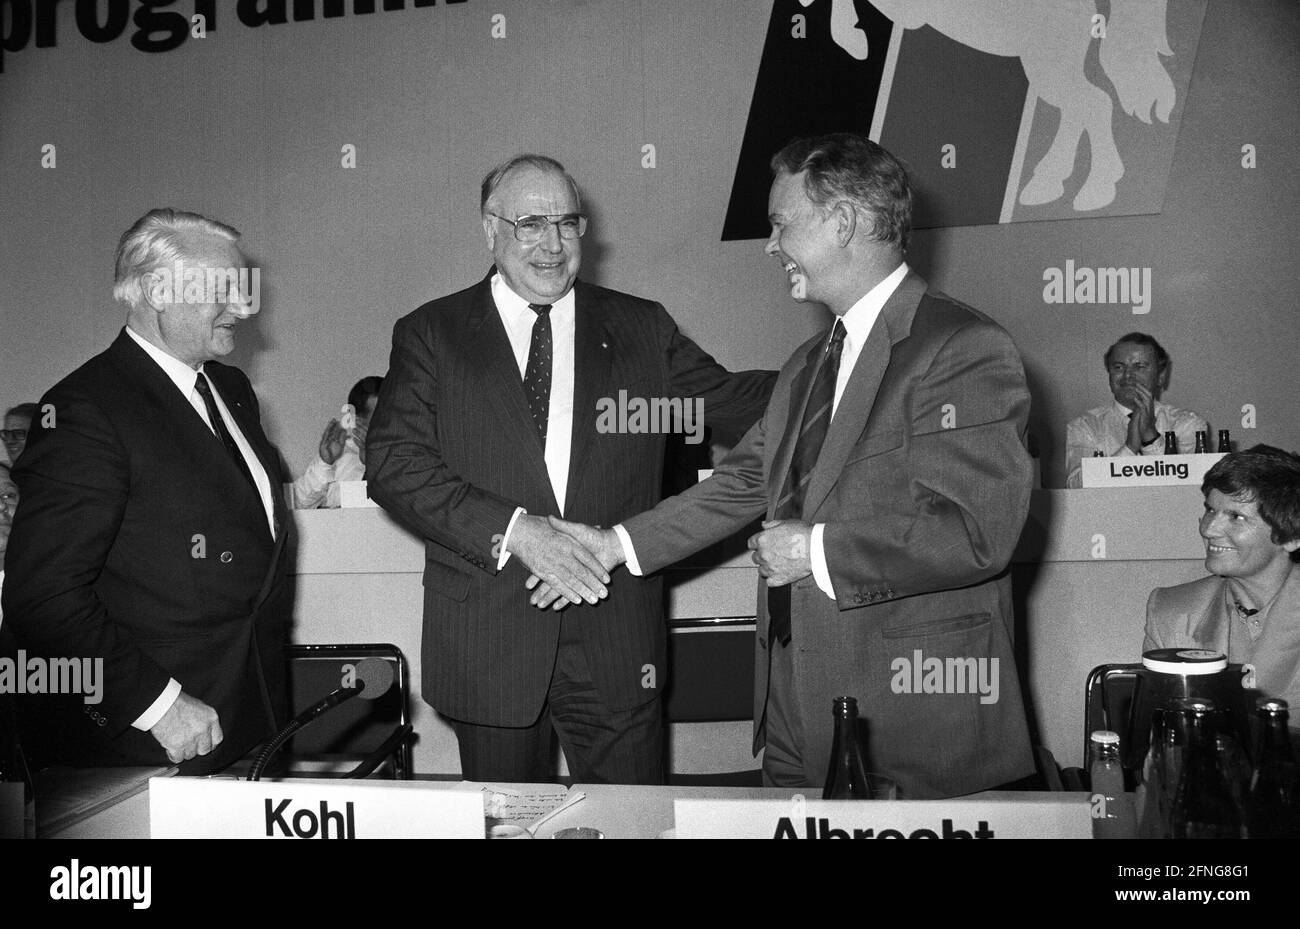 Germany, Hanover, 13.10.1989. Archive No: 09-61-07 CDU state party conference Lower Saxony Photo: CDU Federal Chairman Helmut Kohl (centre) Ernst Albrecht (right), Minister President of Lower Saxony and Wilfried Hasselmann, State Chairman of the CDU [automated translation] Stock Photo